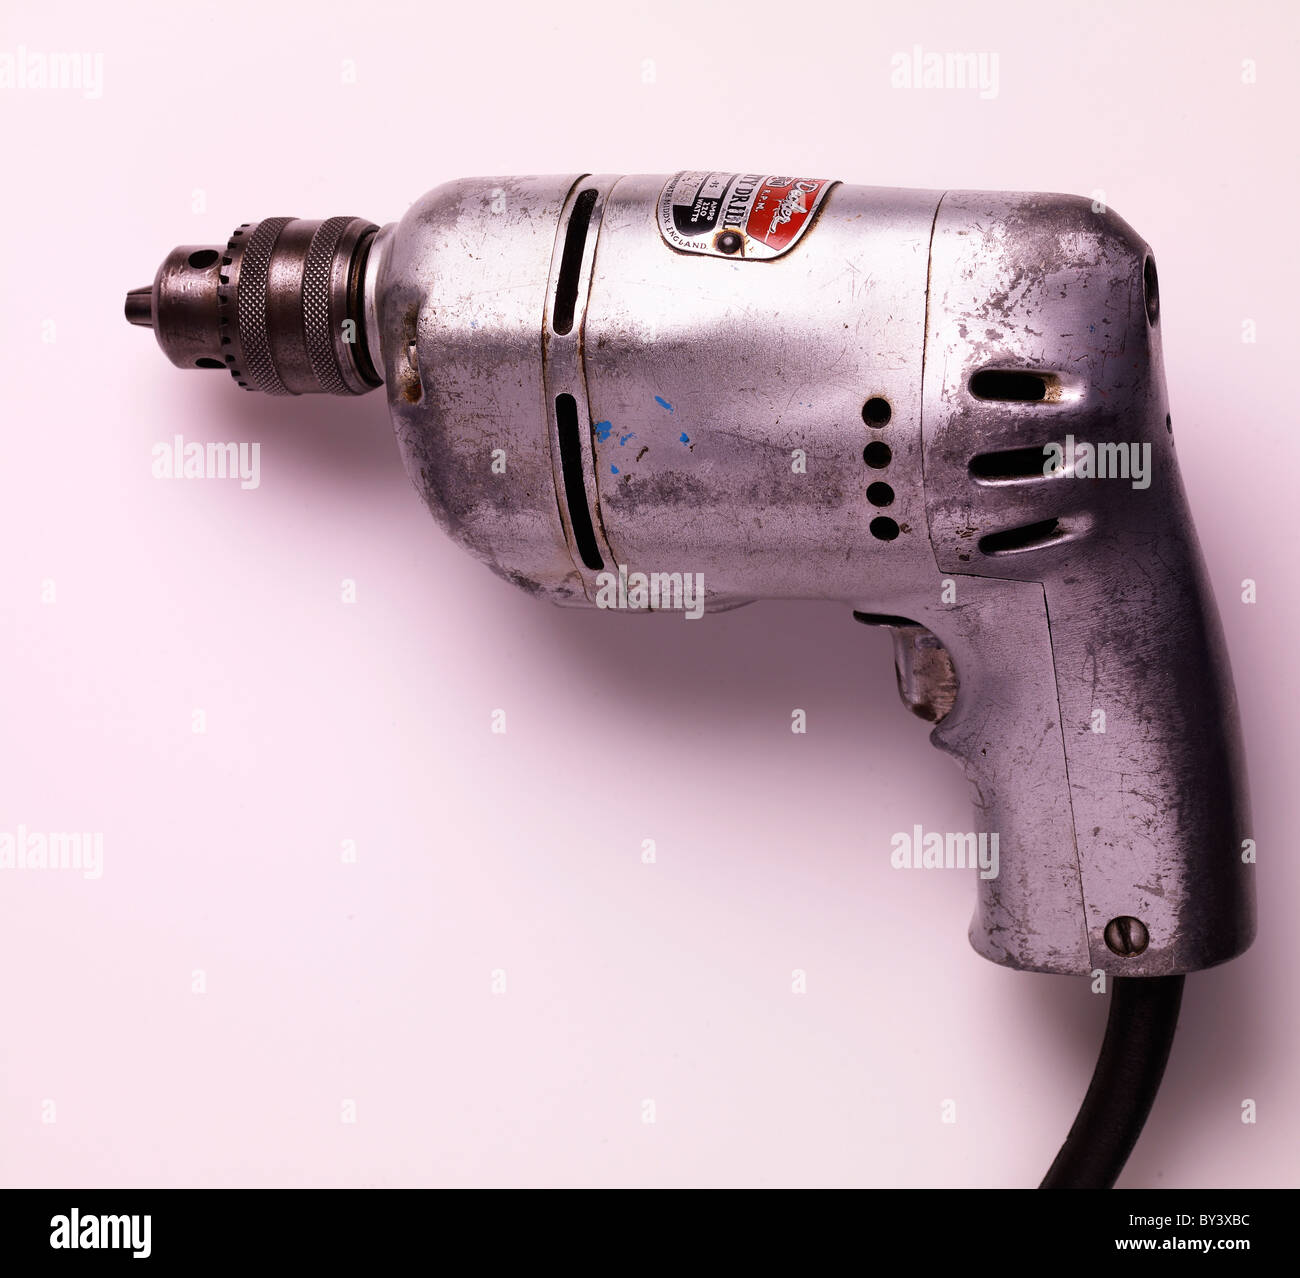 https://c8.alamy.com/comp/BY3XBC/vintage-black-and-decker-electric-drill-BY3XBC.jpg